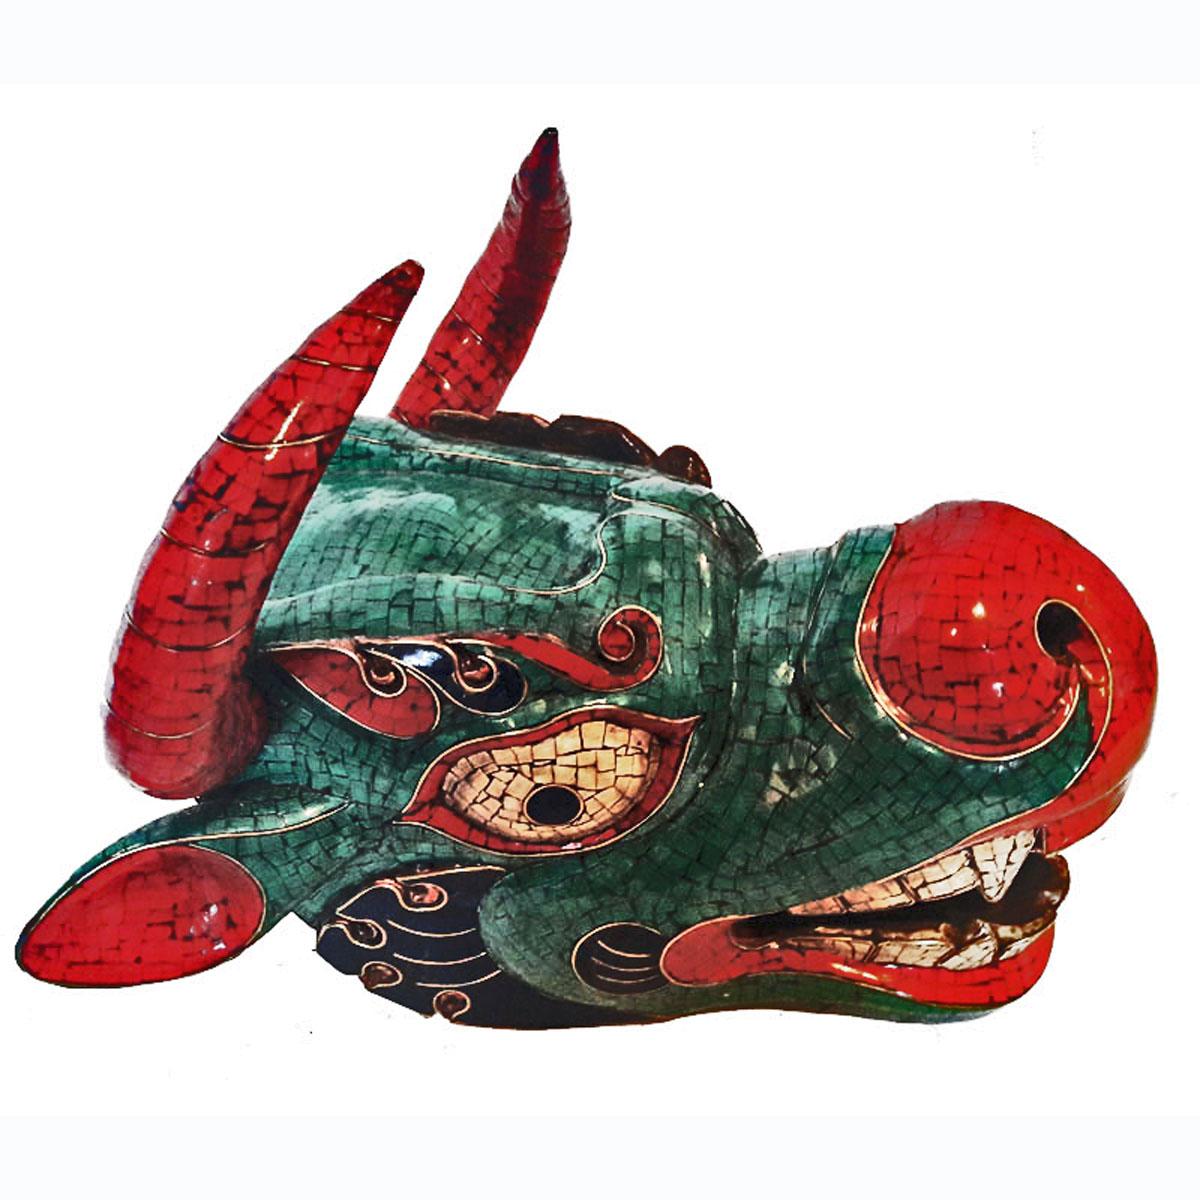 A superb ceremonial mask from Bhutan, used in ritual ceremonies. Made of polychromed wood, this ox mask is a colorful mosaic of red coral, bone, turquoise and lapis lazuli, with fine brass filigree to separate each material.